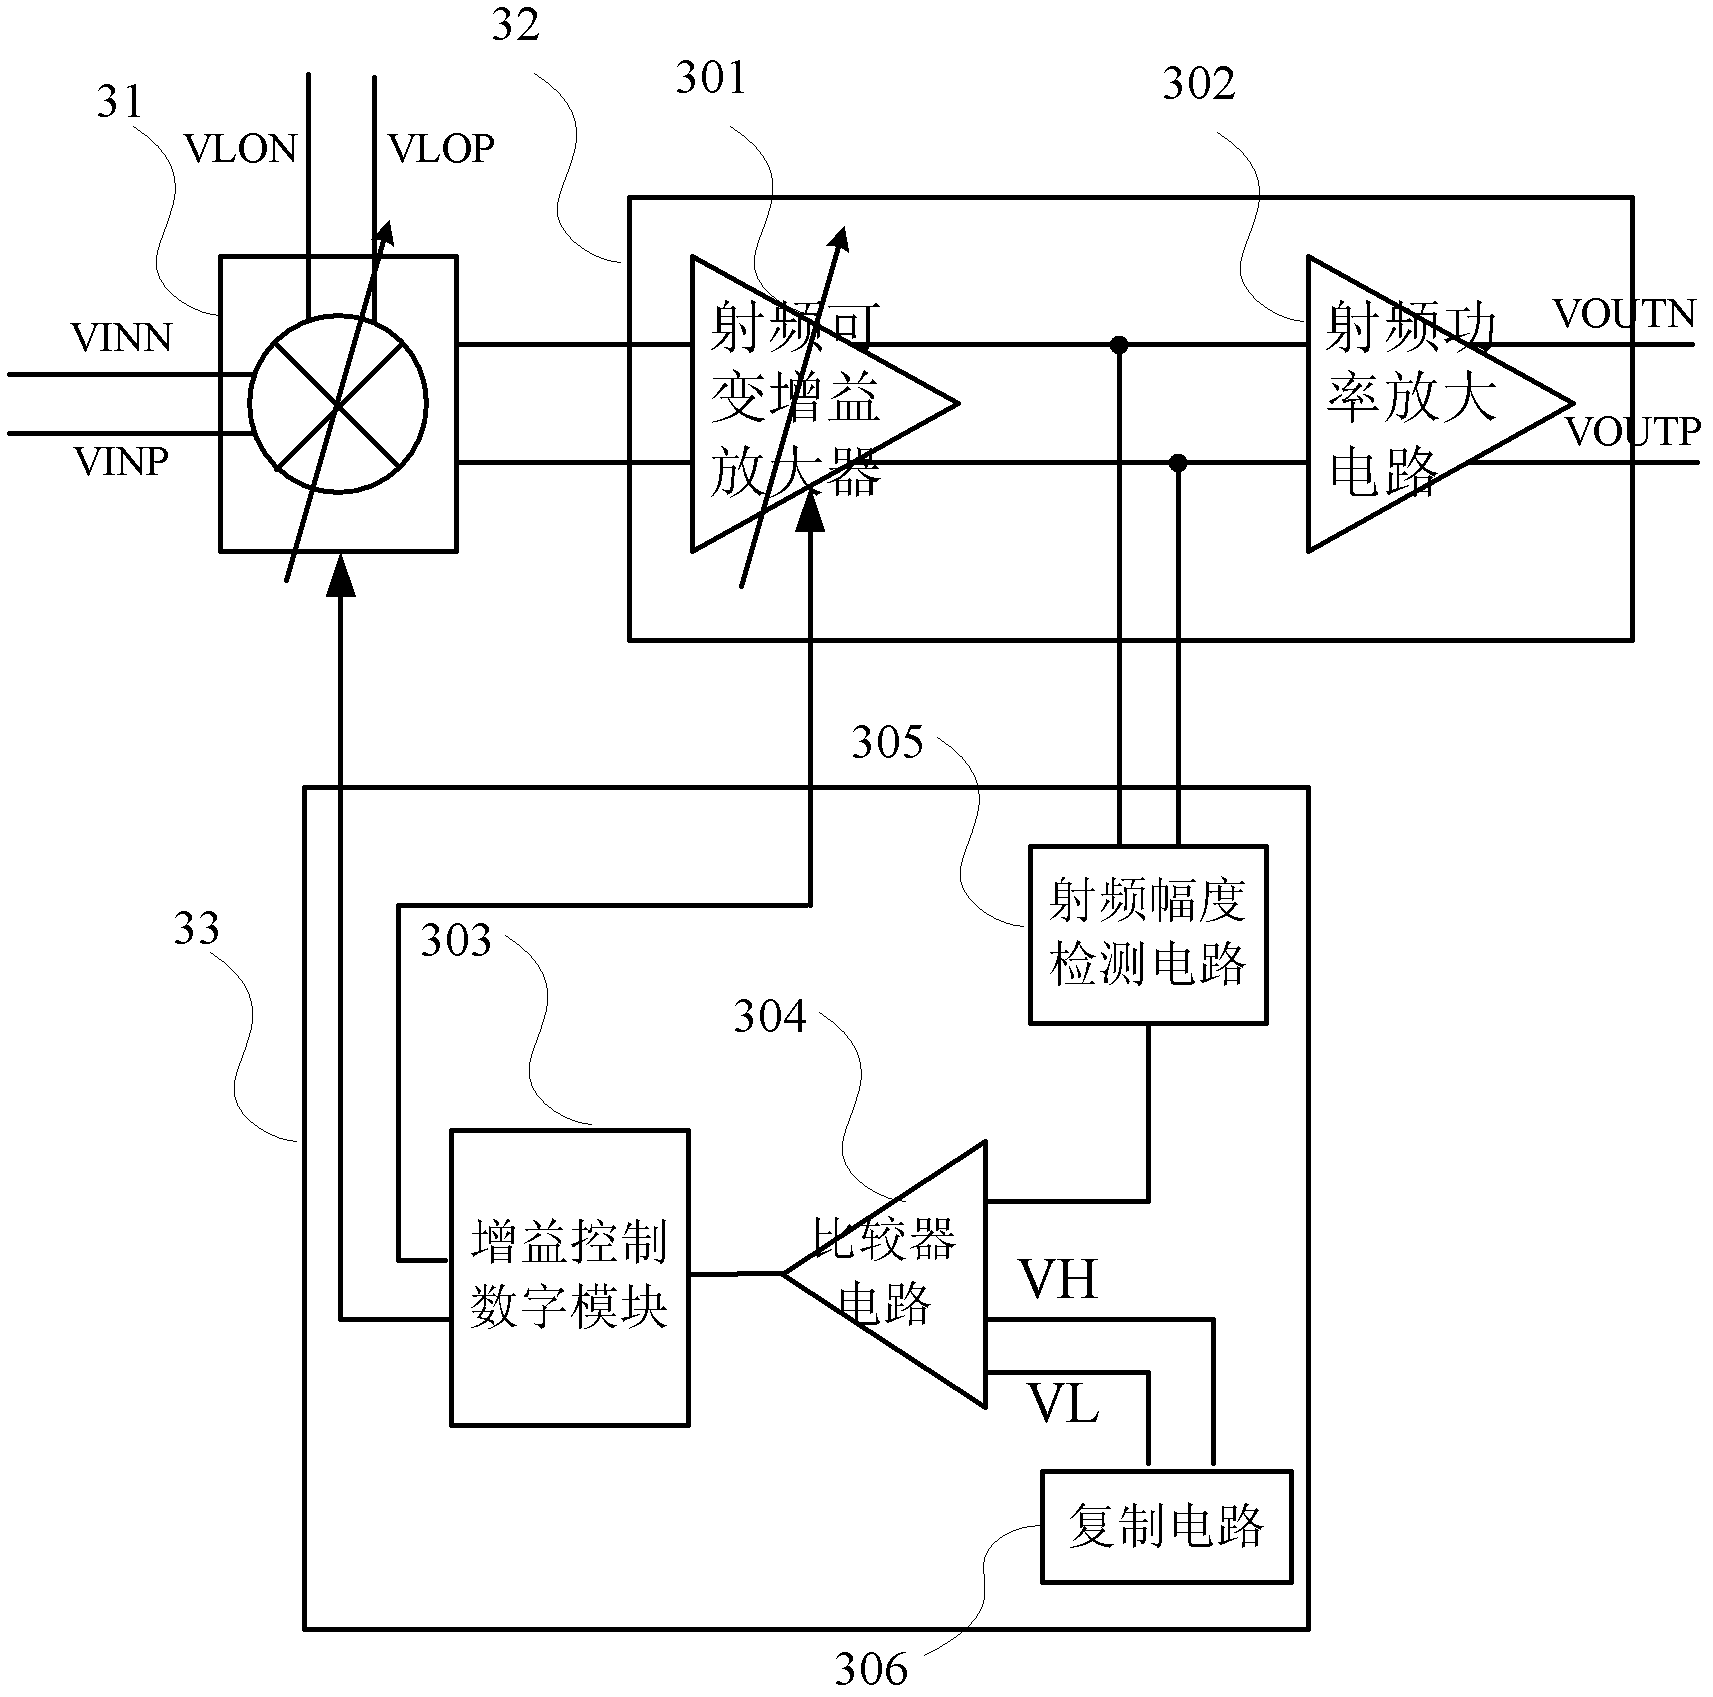 Radio-frequency emission front-end circuit with automatic gain control